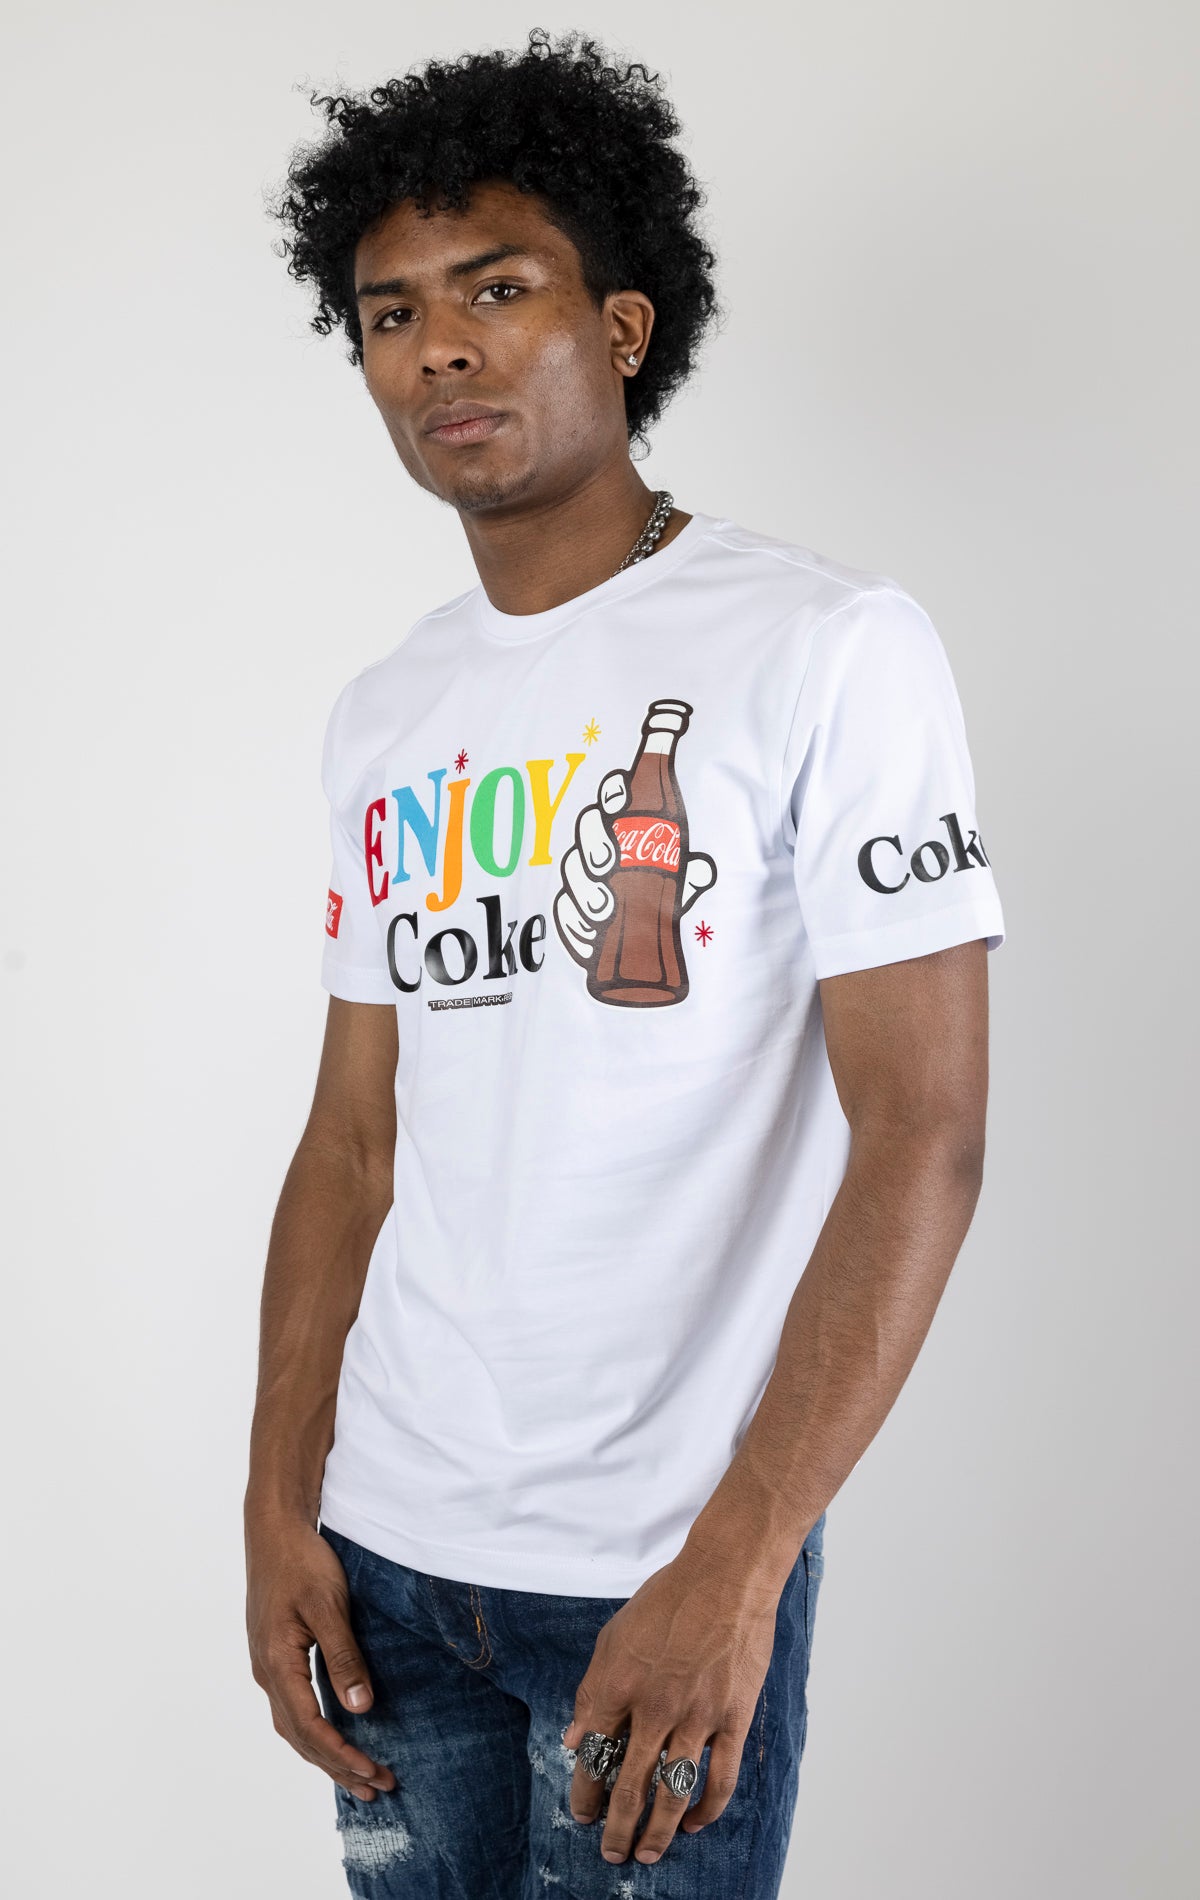 Men's white short-sleeve crew neck t-shirt in a variety of colors. The shirt features a Coca-Cola logo graphic on the front. The graphic is heat-sealed and the tee is made from a blend of 94% cotton and 6% spandex.